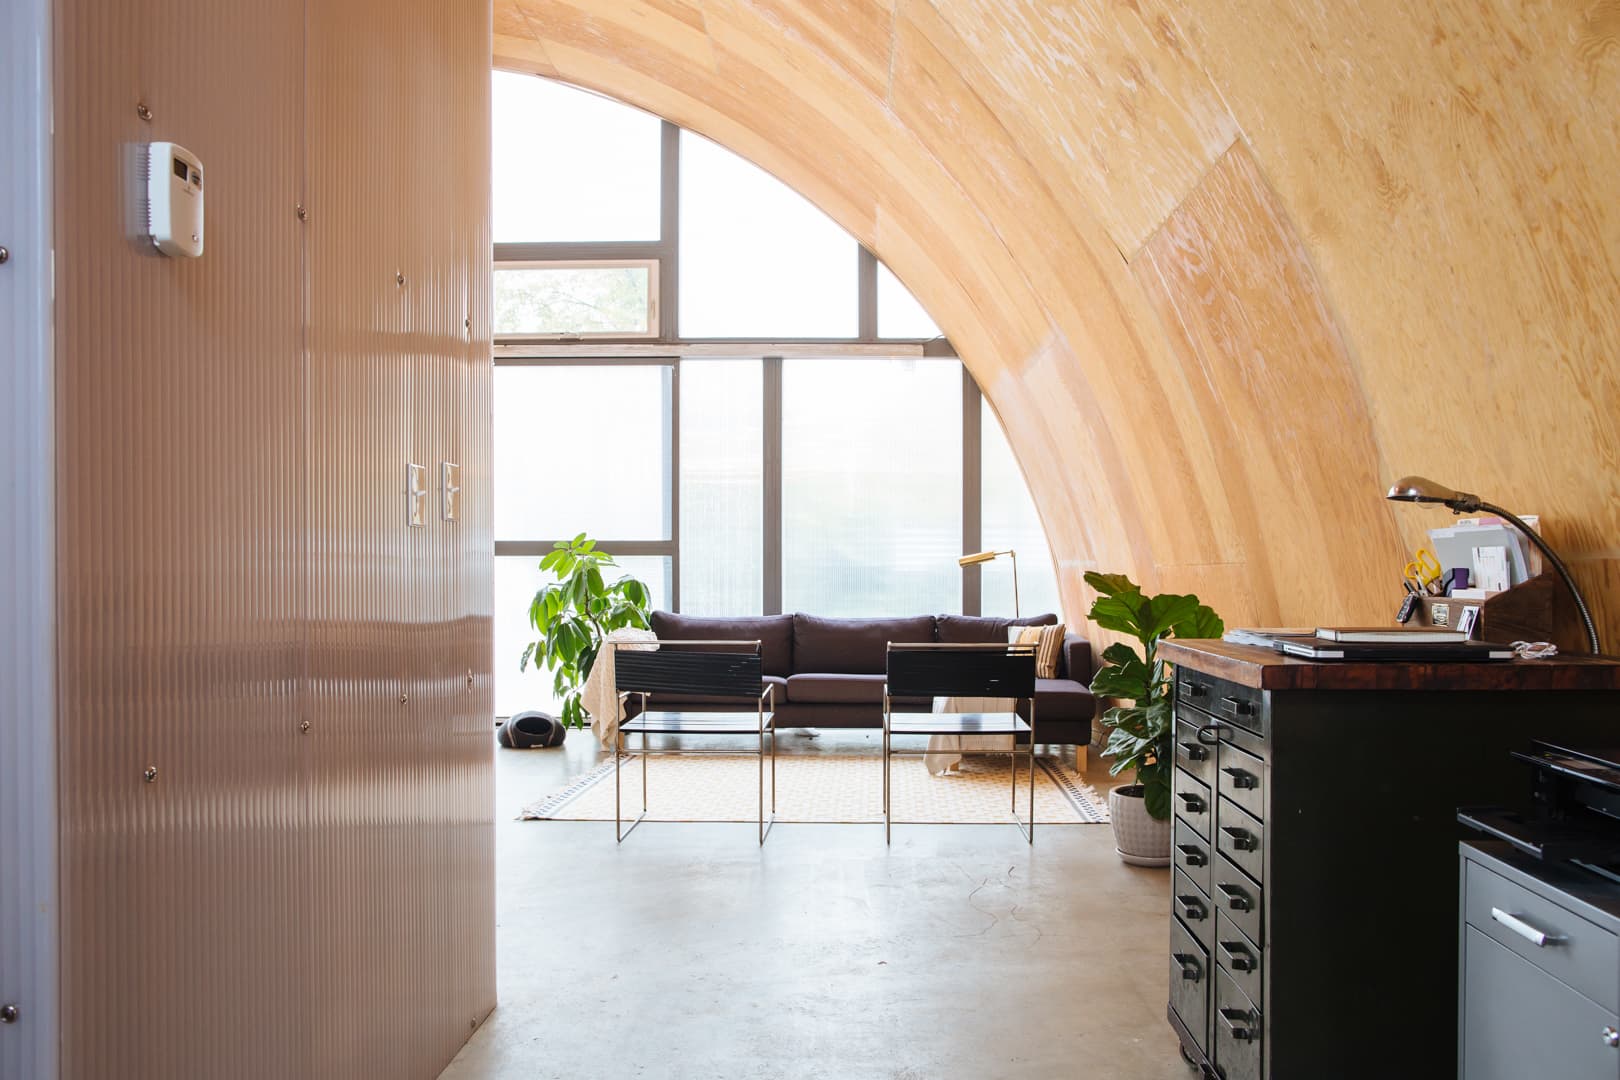 quonset hut house from